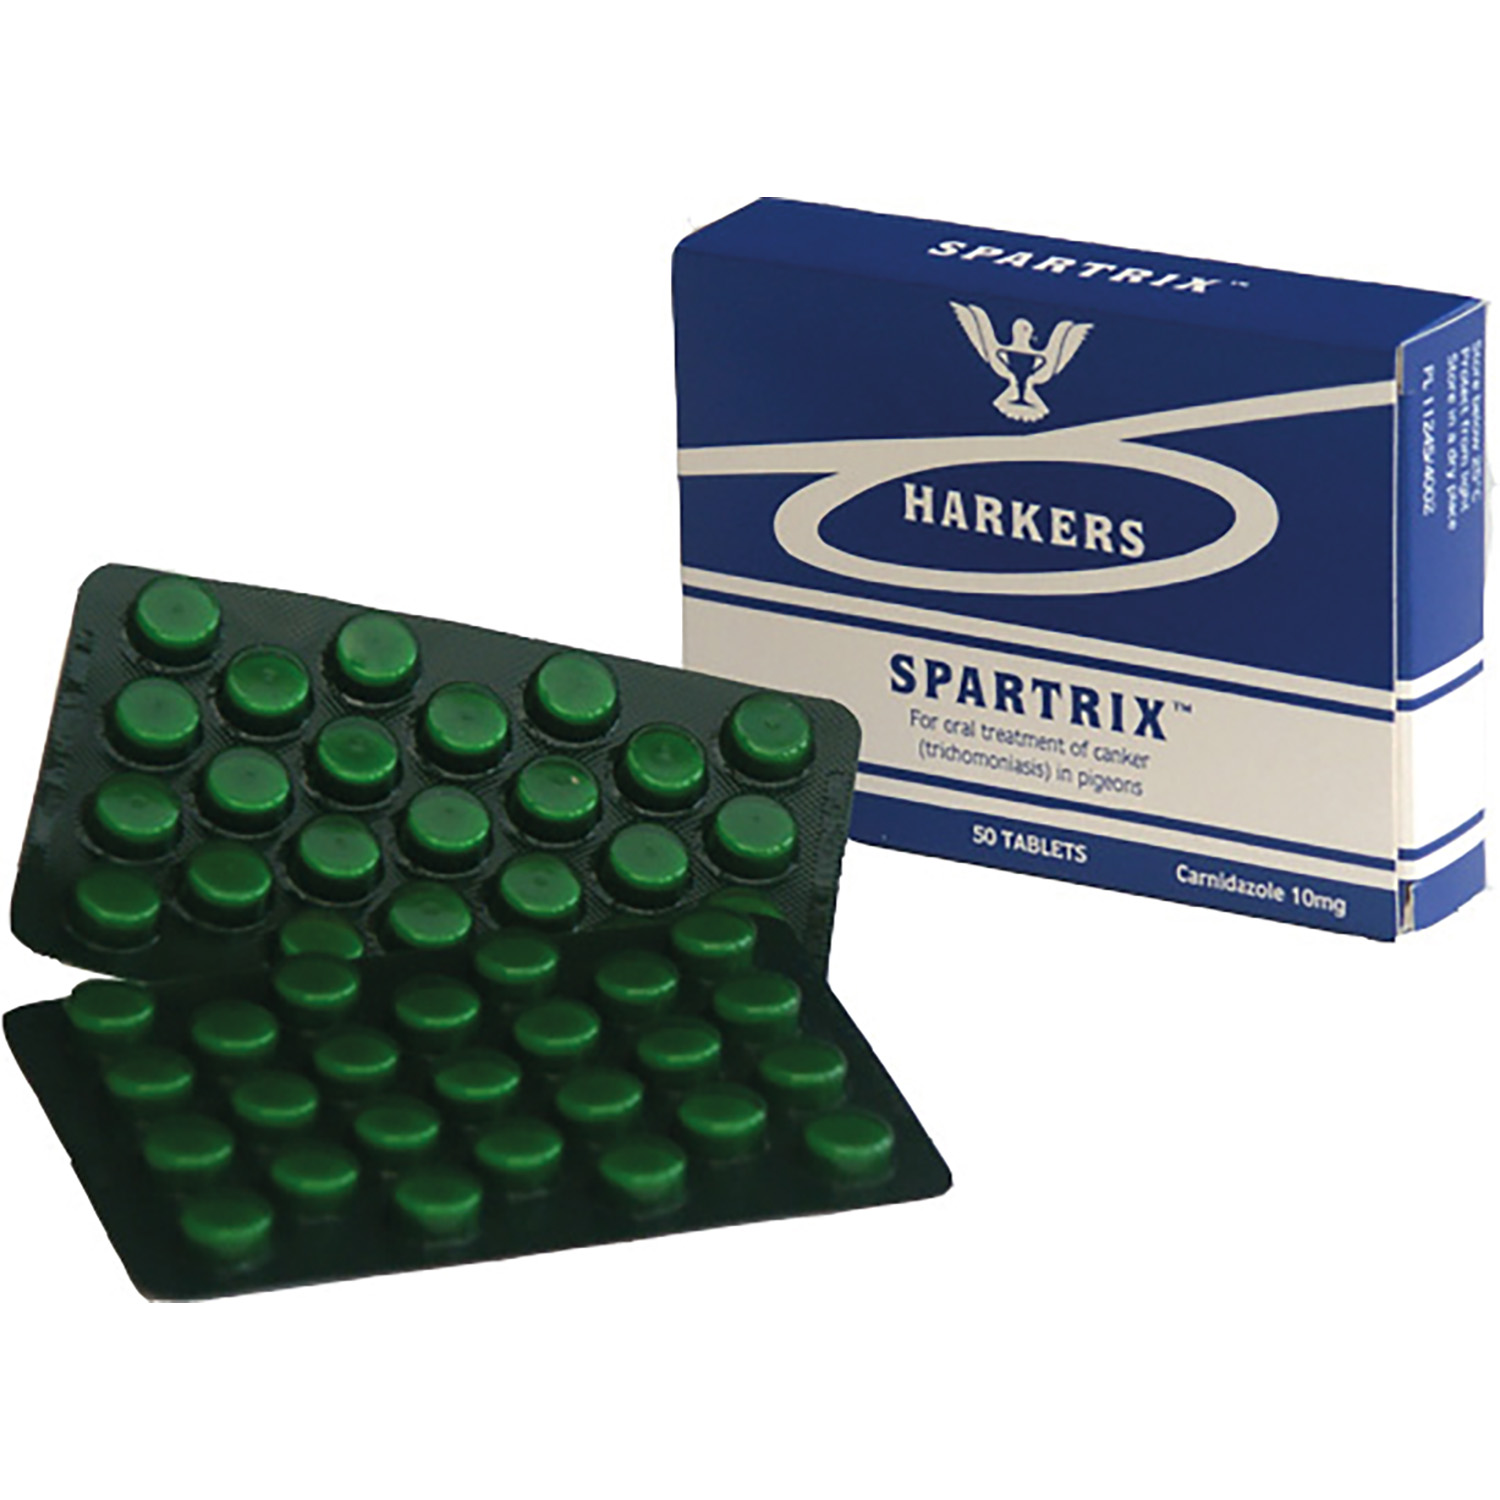 HARKERS SPARTRIX TABLETS